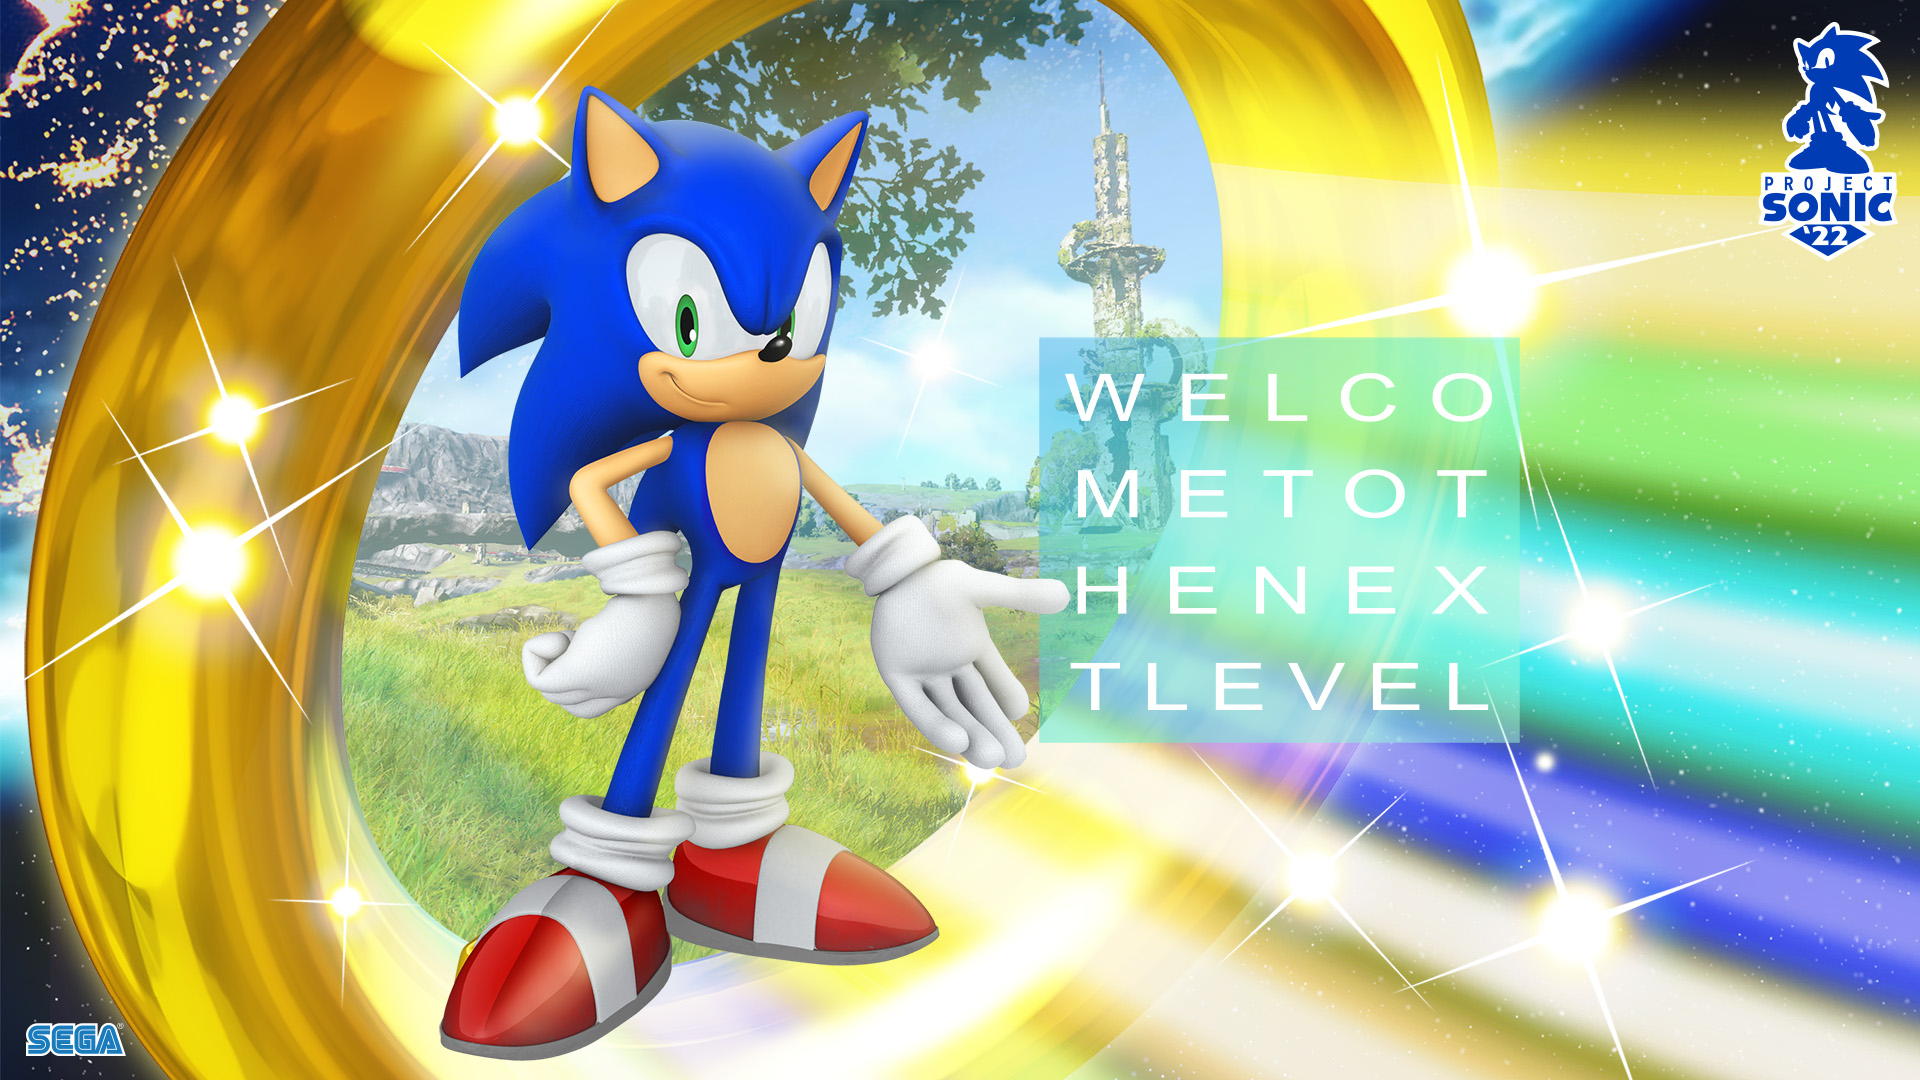 Anime 1920x1080 Sega Sonic video game art Sonic the Hedgehog PC gaming Sonic Frontiers